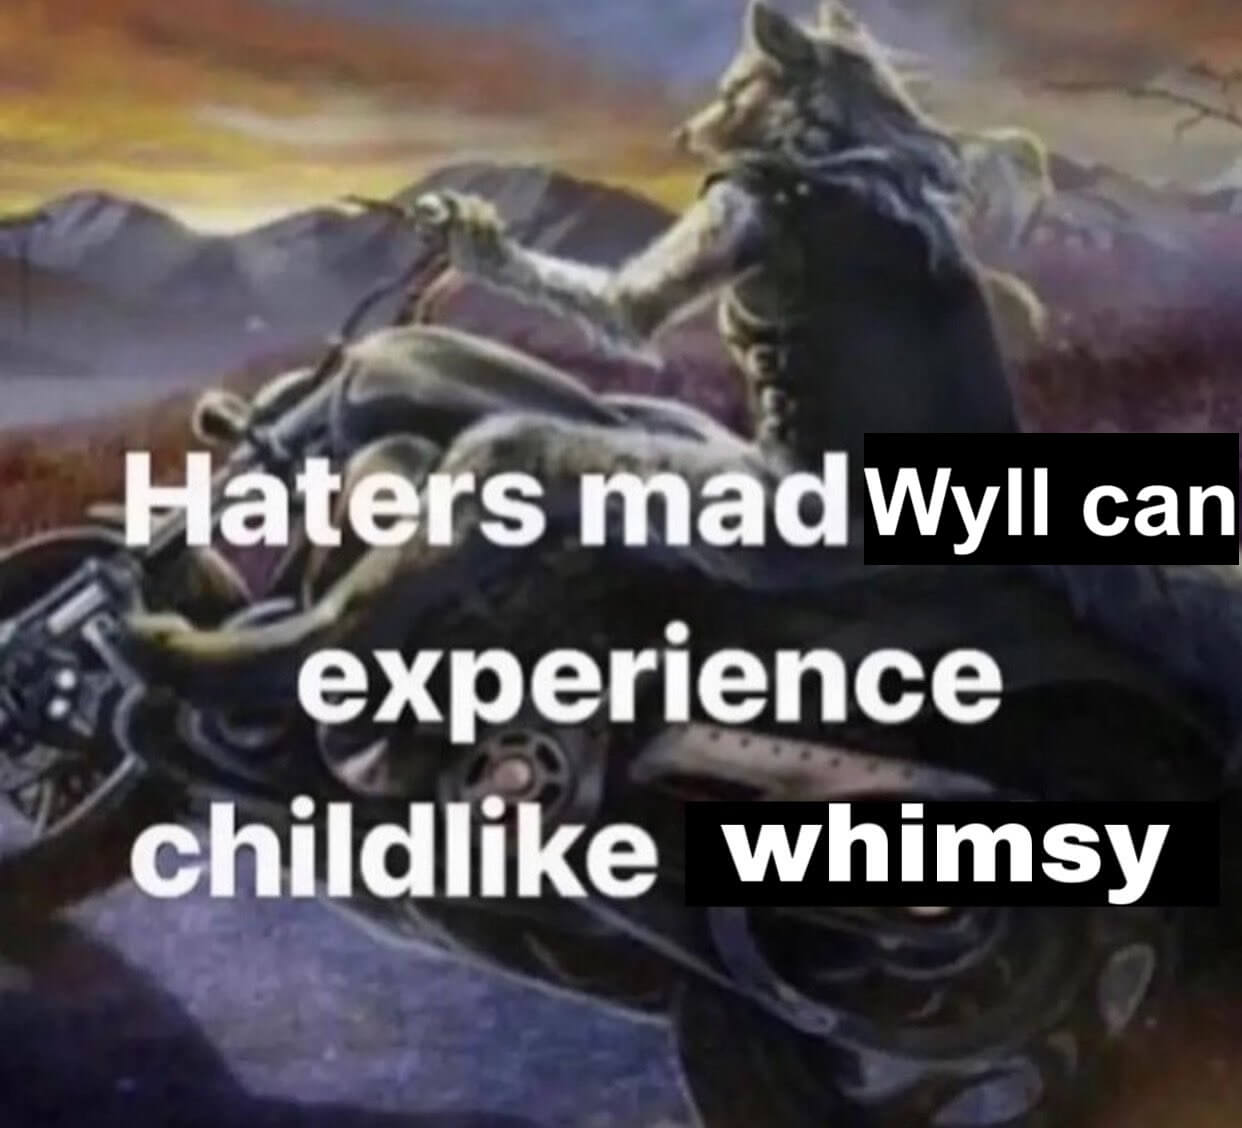 Haters mad Wyll can experience childlike whimsy